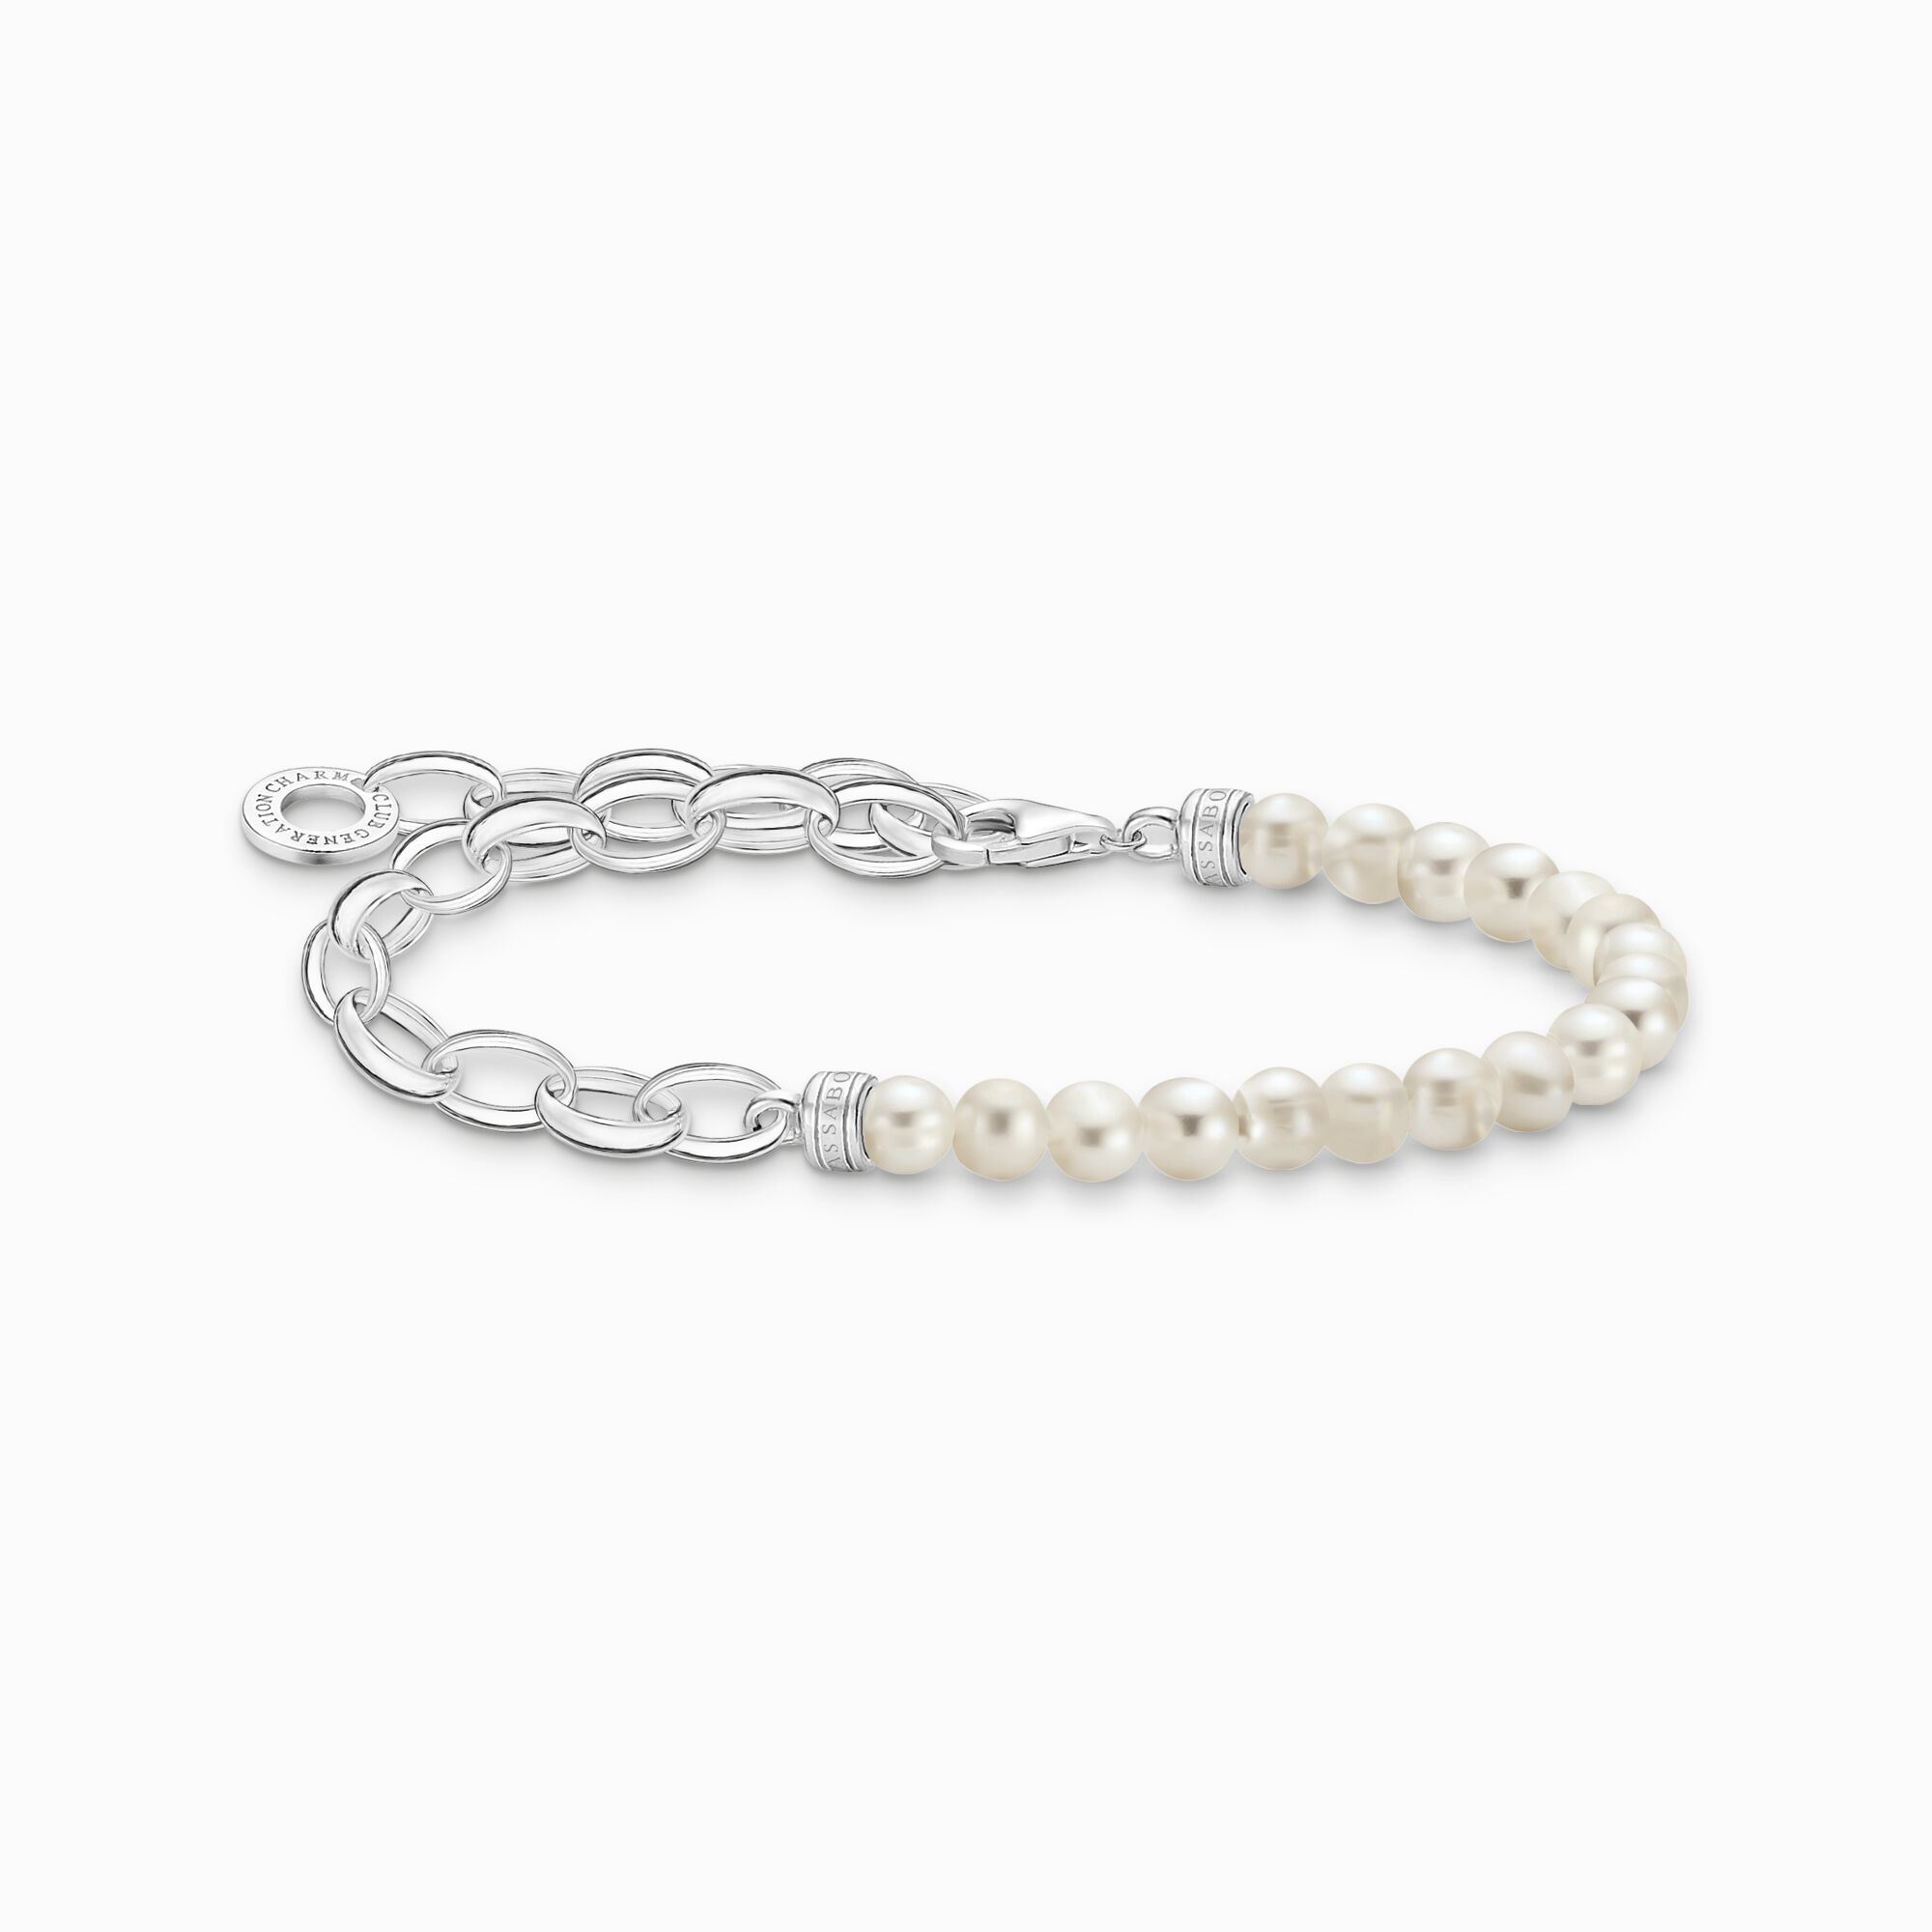 Charm bracelet with white pearls and chain links silver from the Charm Club collection in the THOMAS SABO online store